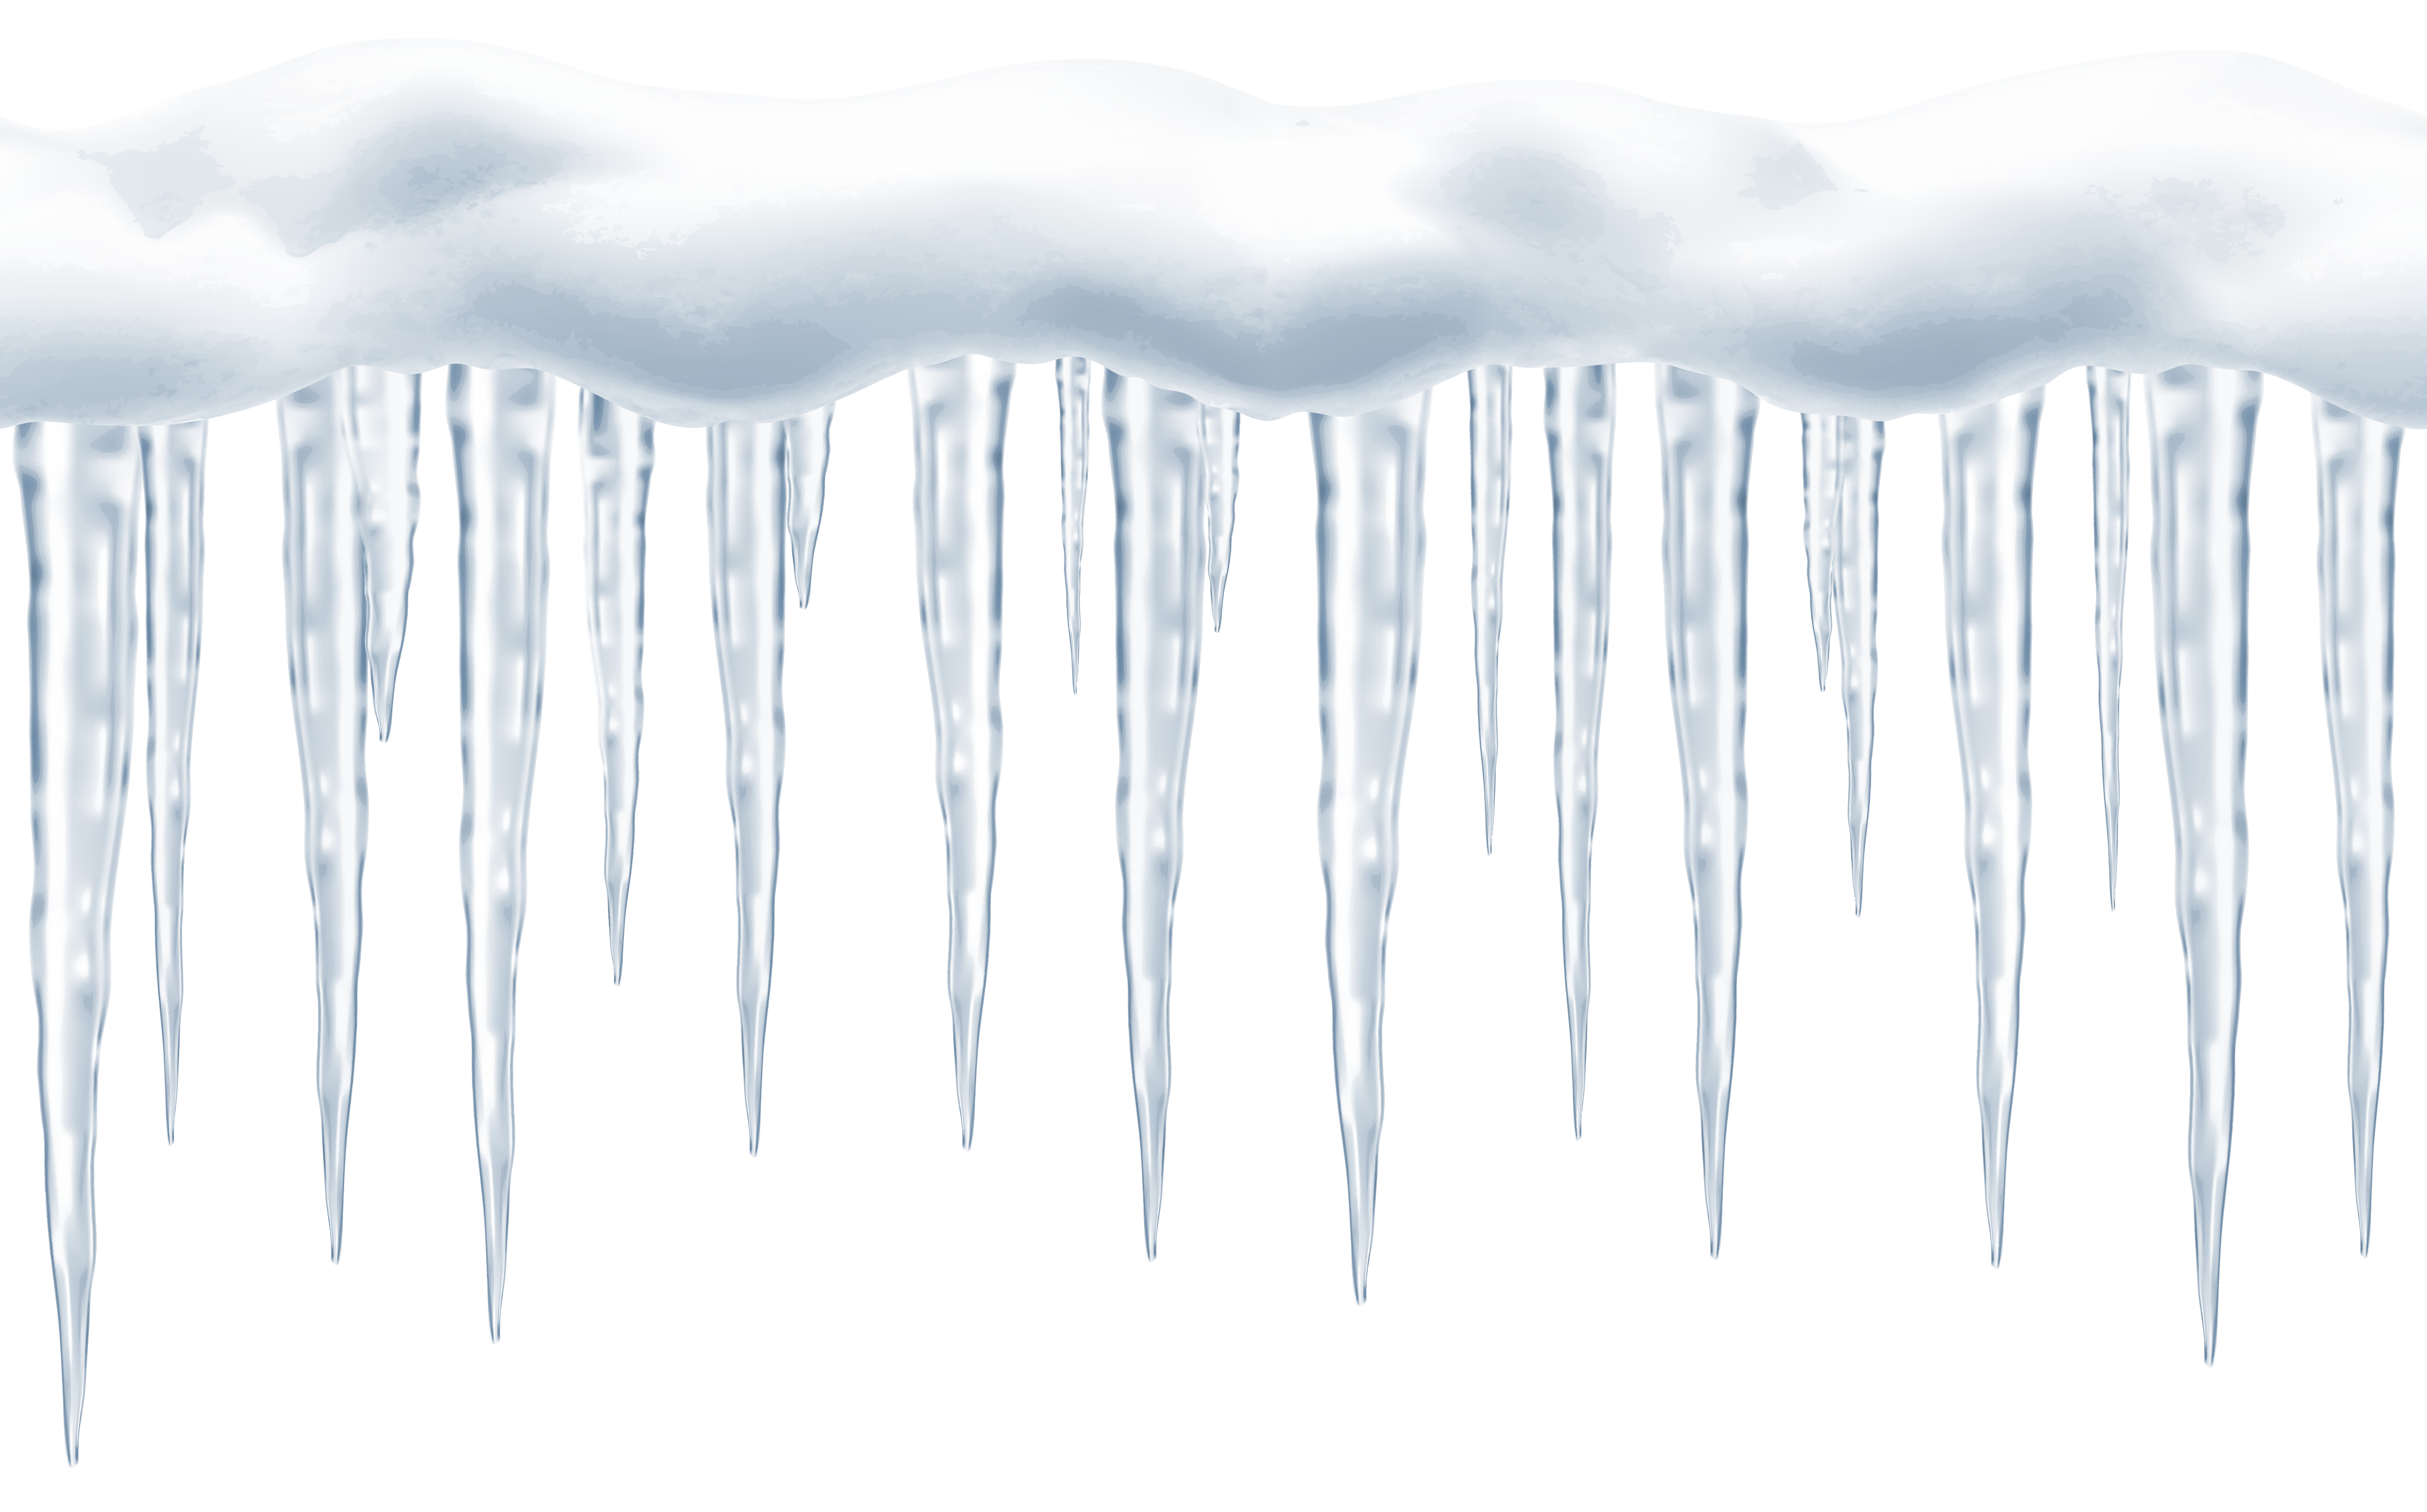 icicle clipart snow